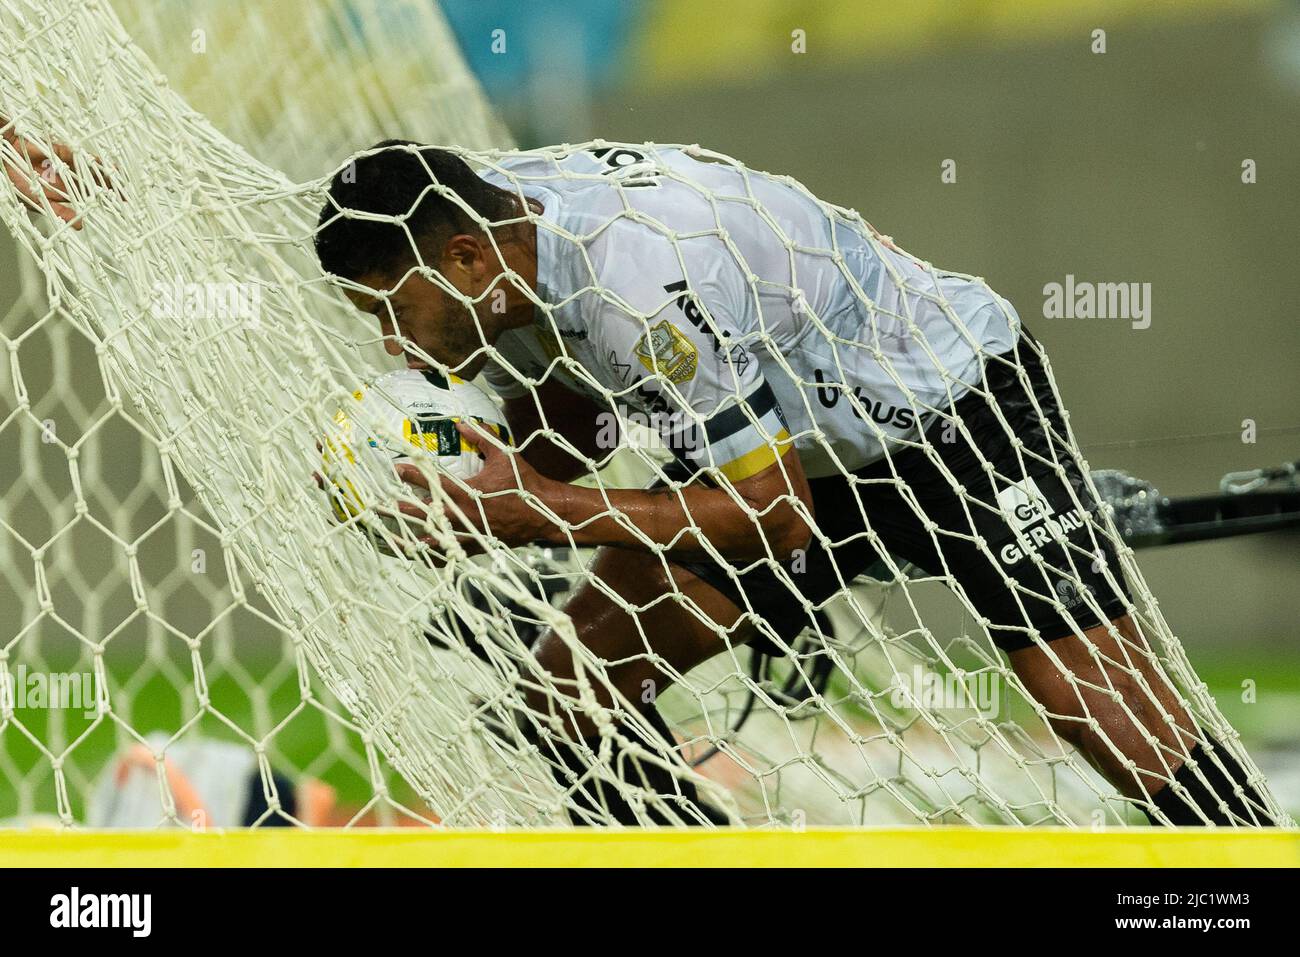 Rio De Janeiro, Brazil. 08th June, 2022. Hulk of Atletico-MG celebrates your scoring during the match between Fluminense and Atletico-MG as part of Brasileirao Serie A 2022 at Maracana Stadium on June 08, 2022 in Rio de Janeiro, Brazil. This game is valid for the third of thirty-eight rounds of the Brasileirao Serie A 2022. (Photo by Ruano Carneiro/Carneiro Images/Sipa USA) Credit: Sipa USA/Alamy Live News Stock Photo